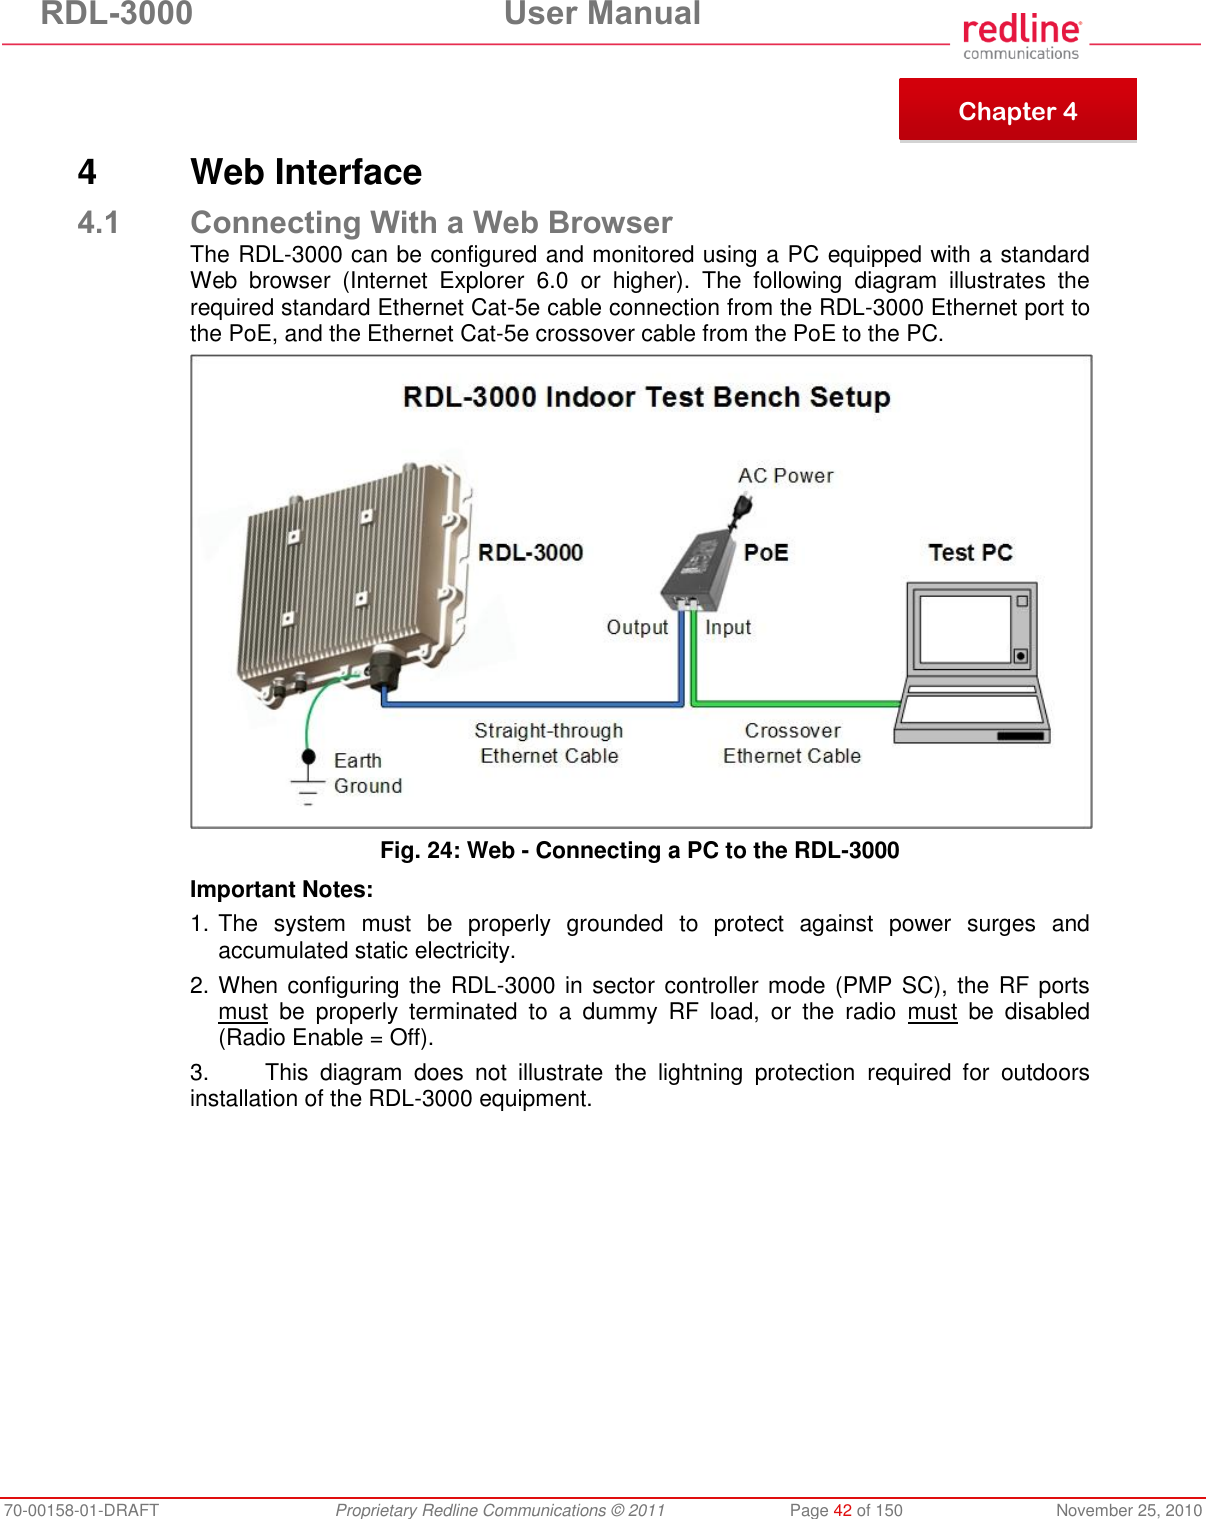 RDL-3000  User Manual 70-00158-01-DRAFT  Proprietary Redline Communications © 2011  Page 42 of 150  November 25, 2010     4  Web Interface 4.1 Connecting With a Web Browser The RDL-3000 can be configured and monitored using a PC equipped with a standard Web  browser  (Internet  Explorer  6.0  or  higher).  The  following  diagram  illustrates  the required standard Ethernet Cat-5e cable connection from the RDL-3000 Ethernet port to the PoE, and the Ethernet Cat-5e crossover cable from the PoE to the PC.  Fig. 24: Web - Connecting a PC to the RDL-3000 Important Notes: 1. The  system  must  be  properly  grounded  to  protect  against  power  surges  and accumulated static electricity. 2. When configuring the RDL-3000 in sector controller mode (PMP SC), the RF ports must  be  properly  terminated  to  a  dummy  RF  load,  or  the  radio  must  be  disabled (Radio Enable = Off).  3.  This  diagram  does  not  illustrate  the  lightning  protection  required  for  outdoors installation of the RDL-3000 equipment.   Chapter 4 